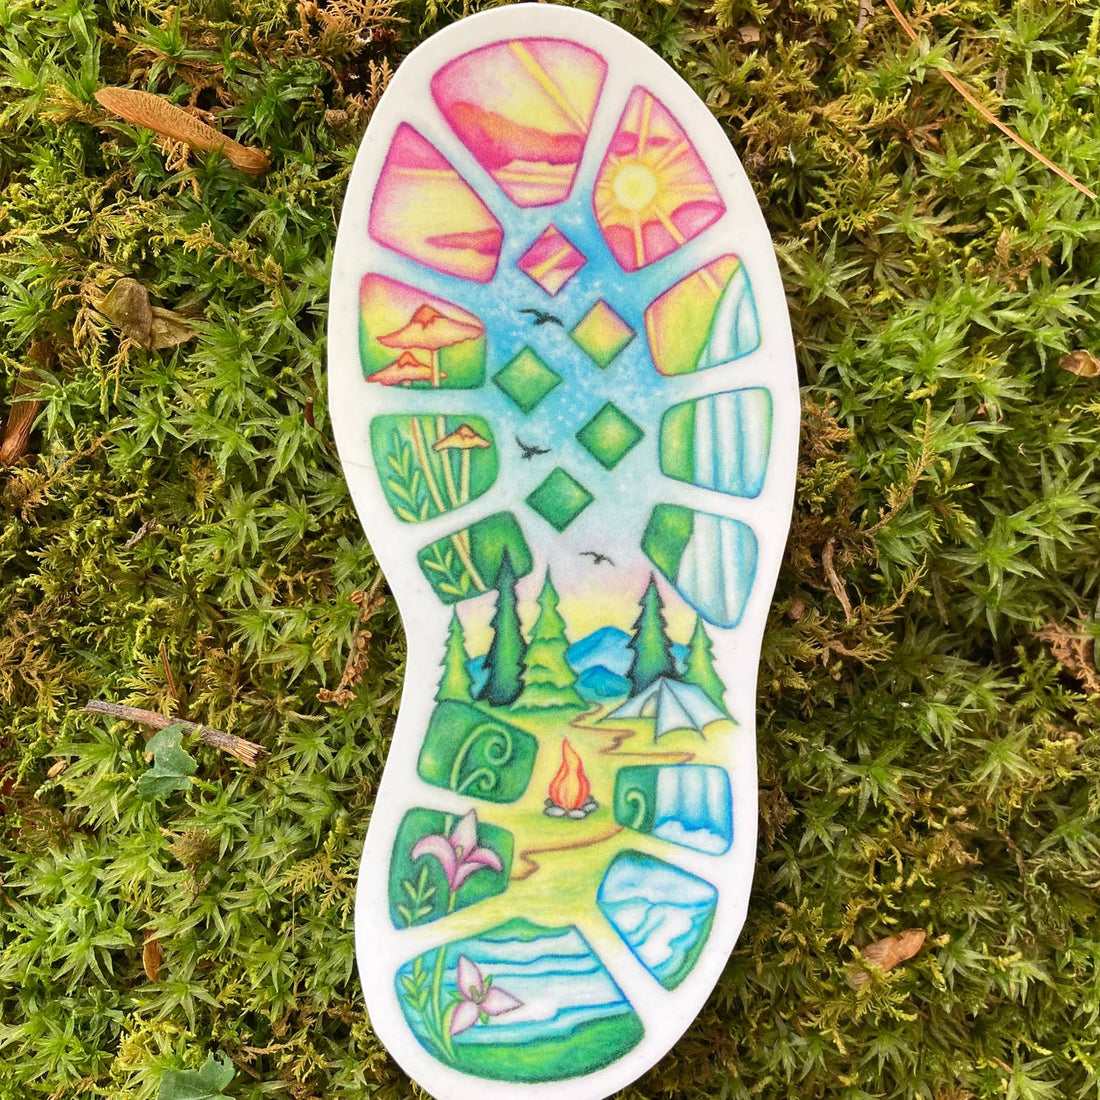 Boot Print Adventures Sticker - Wandering Arts and Crafts